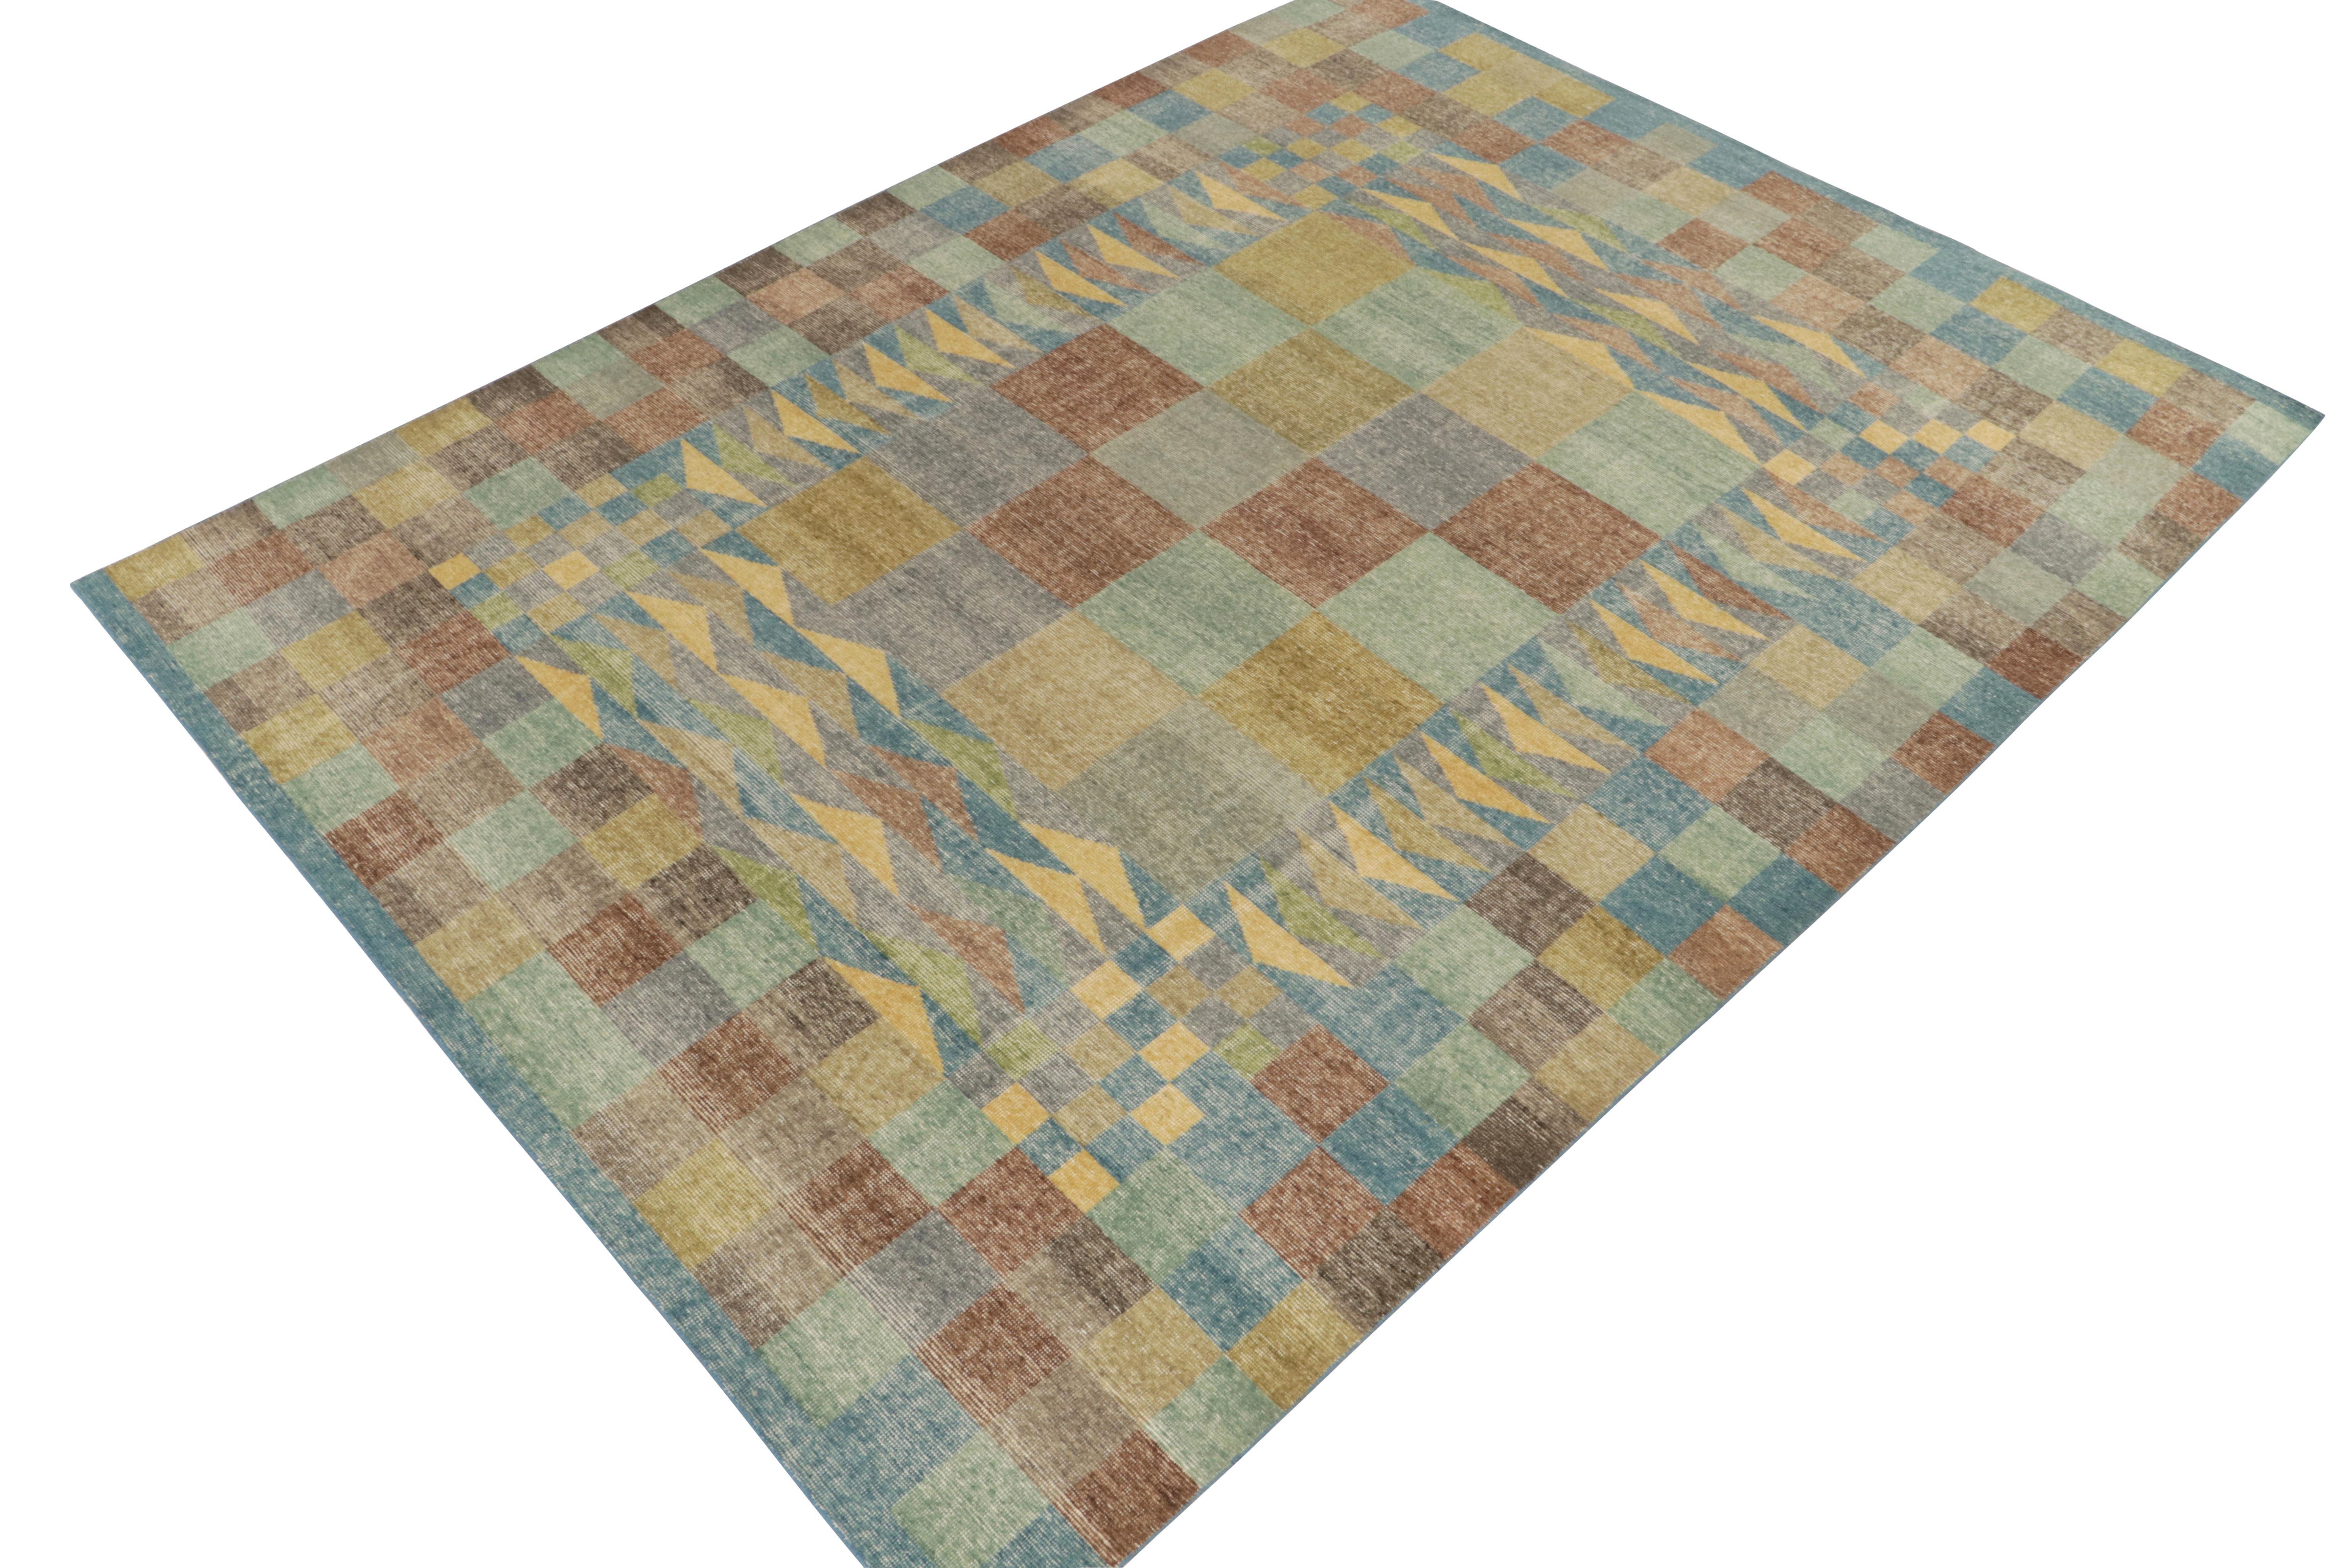 A 9x12 Scandinavian inspired rug from our celebrated Homage selections exemplifying mid-century modern and folk art alike. The rug showcases a sophisticated play of blue, green, brown and gold for a handsome character expertly married to the